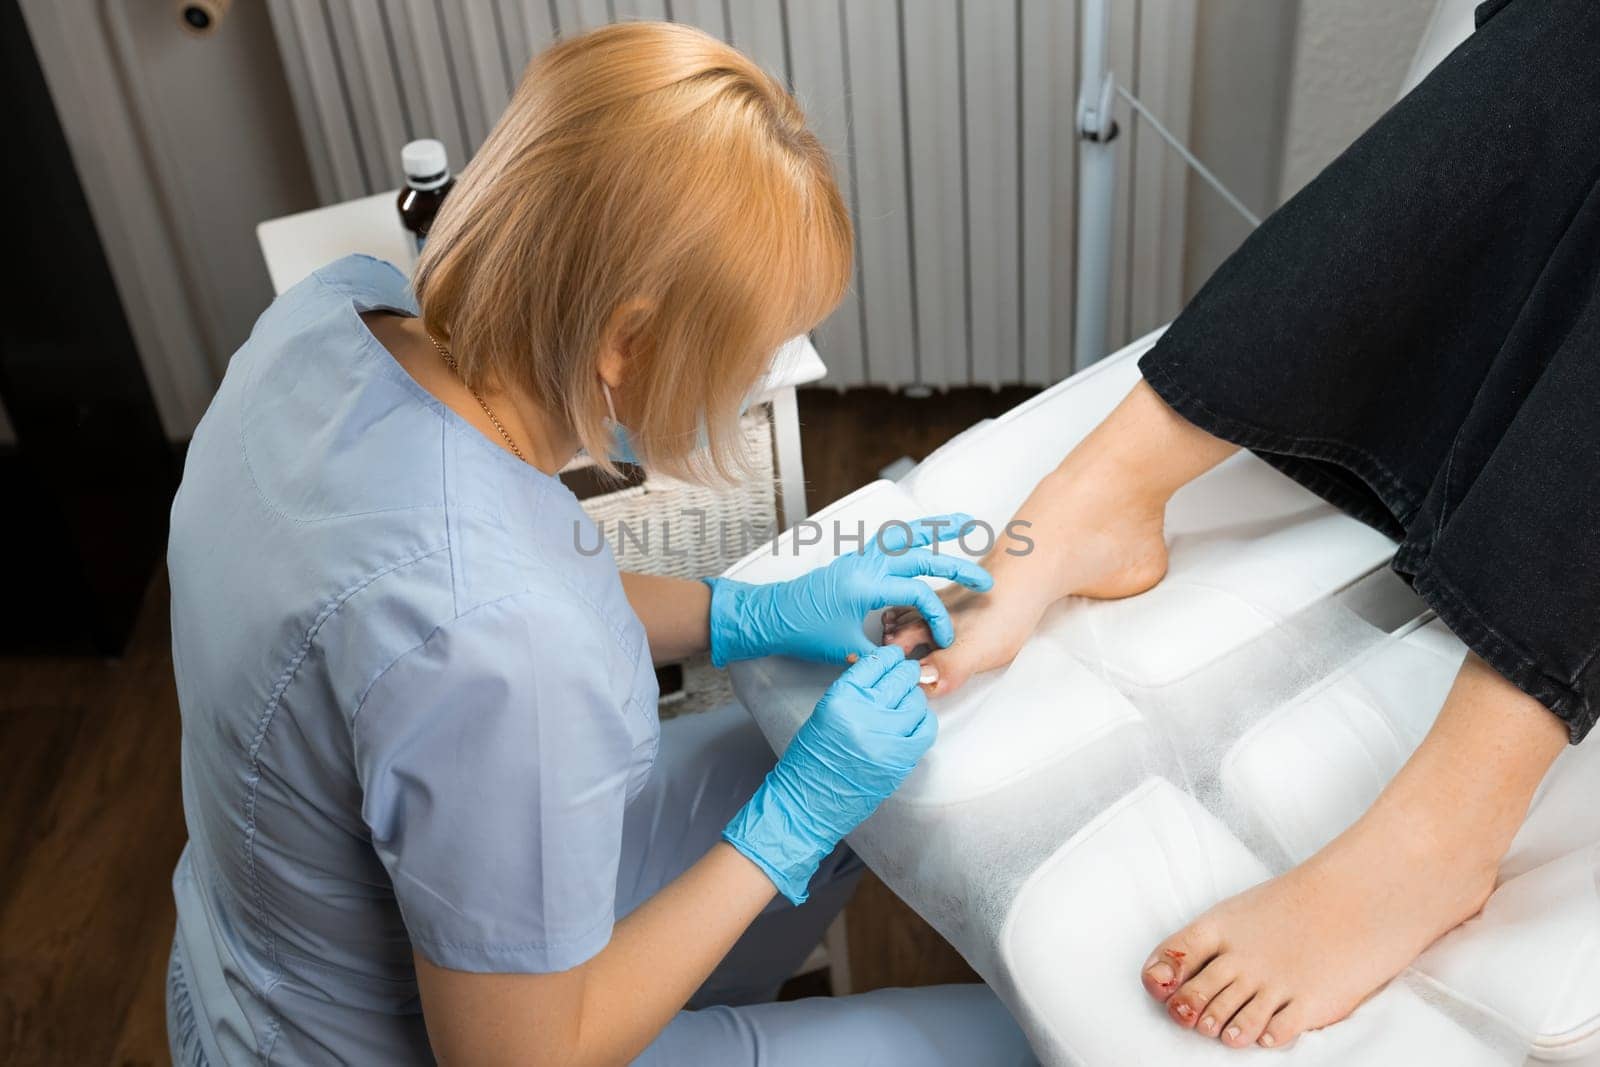 Top view of female podiatrist performs the procedure of ingrown nail removal using nippers.